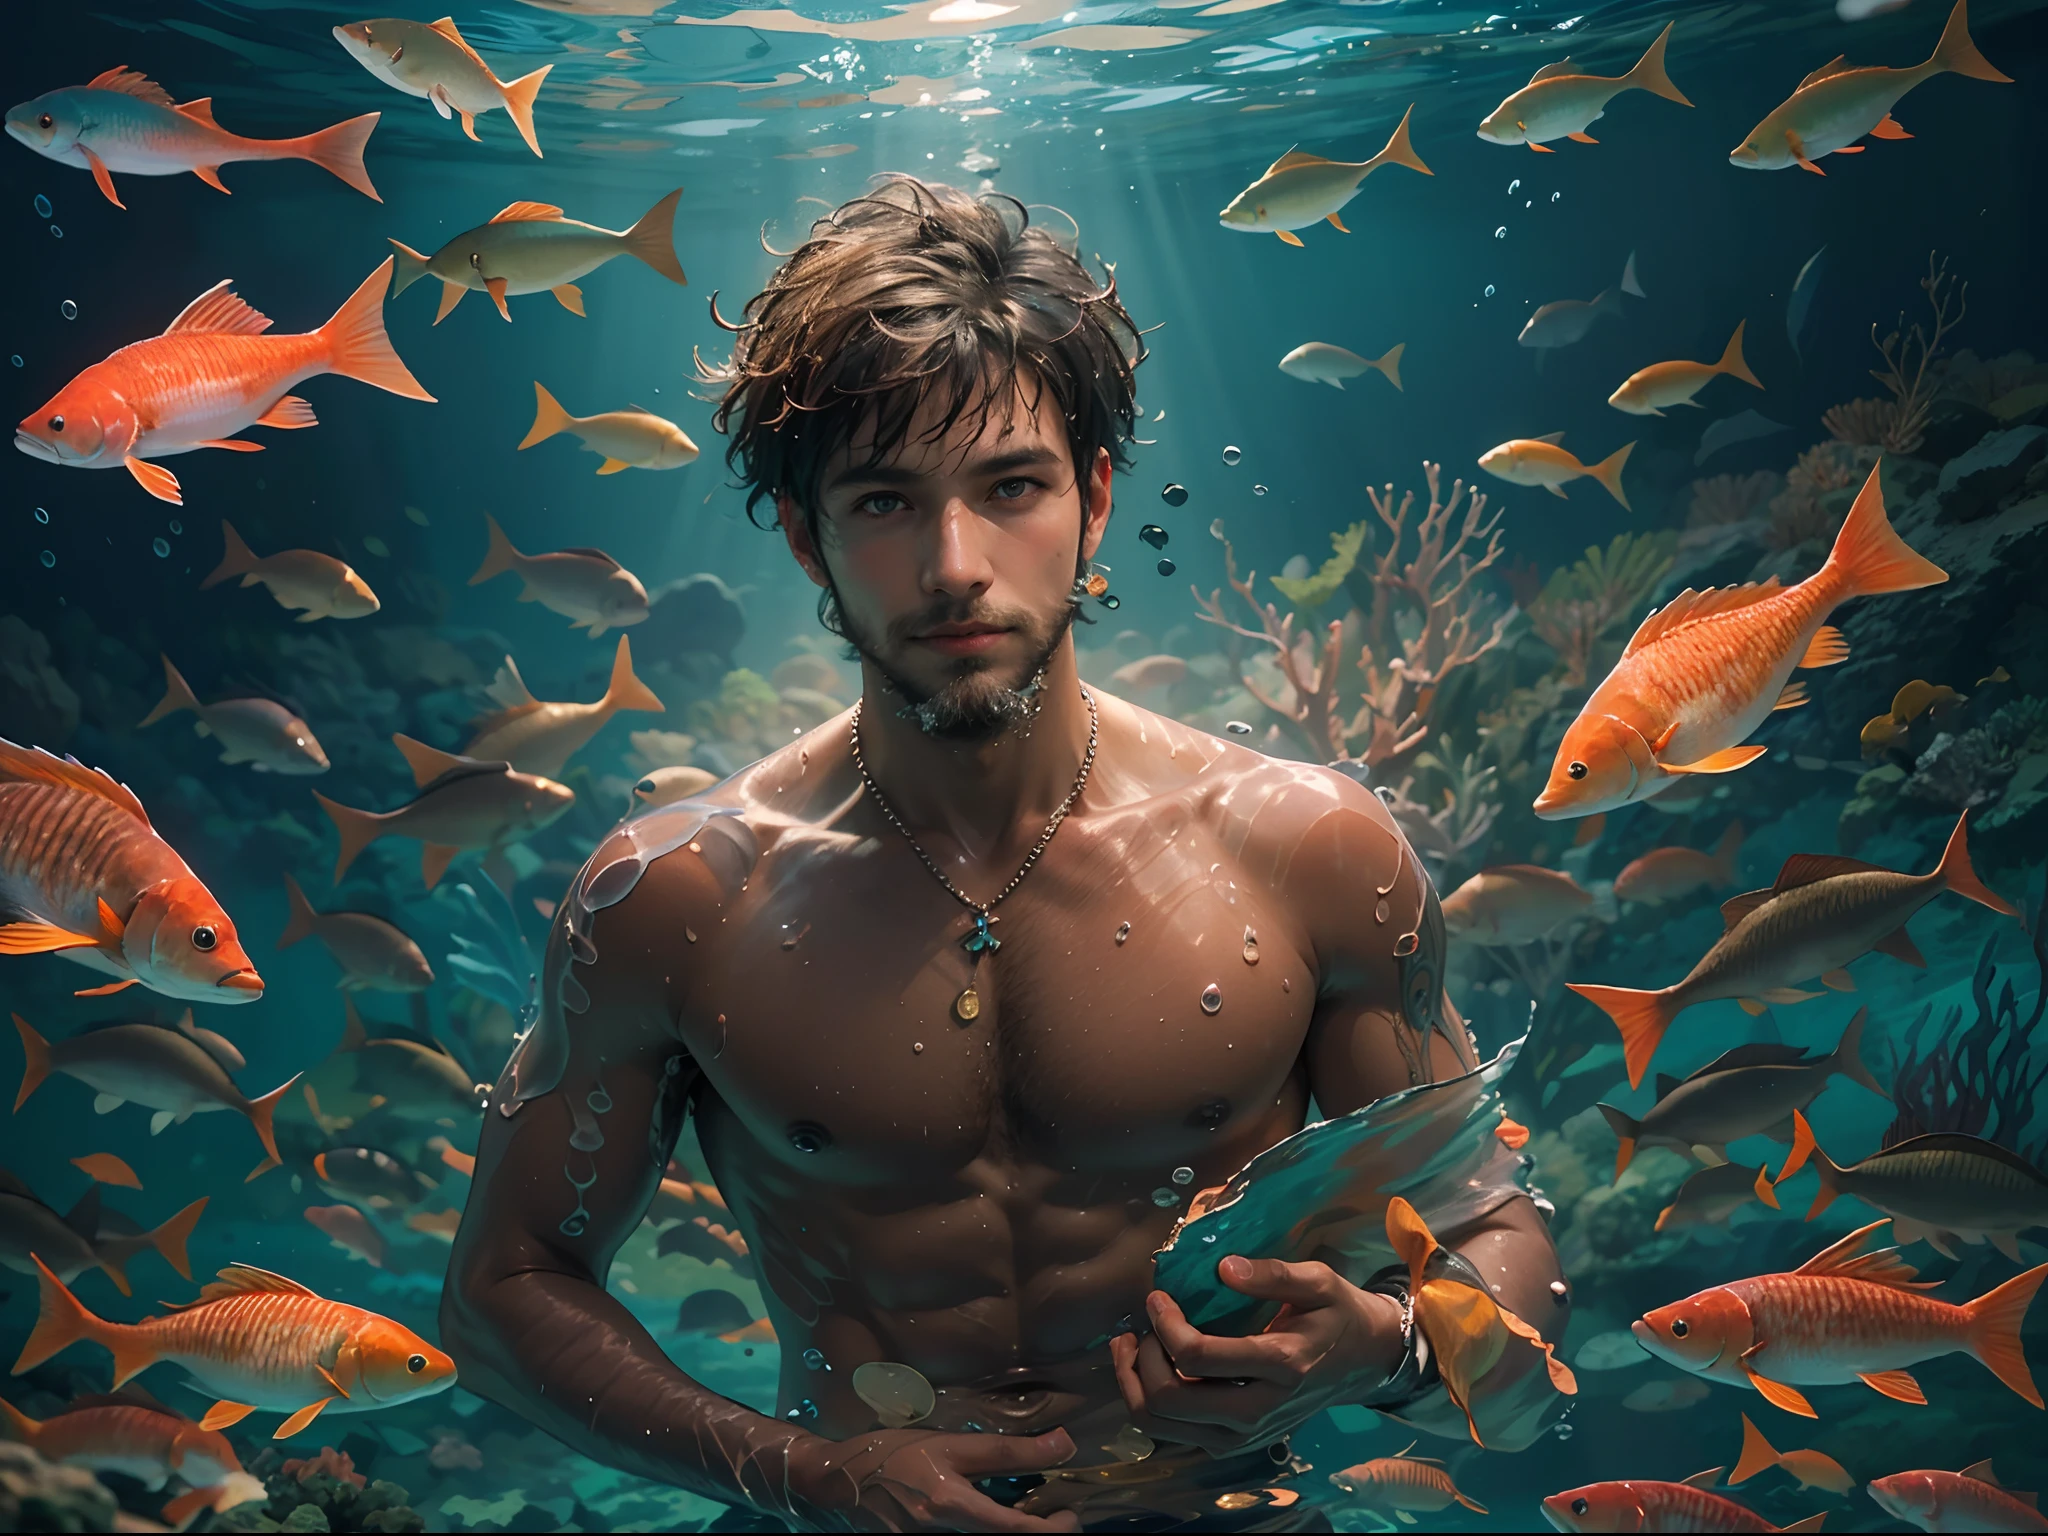 （Highest quality authentic textured skin),(abyssal), (A boy swims in the deep sea:1.5), Handsome facial features, (Sexy short beard:1.5), Burning bright and cold eyes, Strong body, (Shirtless), Bronzed skin,musculous, (He had a mischievous smile on his face),brown  hair,(Dramatic photo:1.4),(flamboyant photo), (Look down at the camera), (A simple necklace hangs around his neck),(Hair flows in water),(Surrounded by redfish),(Underwater, Marine life, Beautiful coral reef, Fish),(Vortices and tidal currents in the background),(Dramaticlight),(Magnificent scene),In the distant background is a temple submerged in a coral reef,the reef,Epic realism,Cinematic feeling,(high-density imaging review:1.5), (Teal and orange:0.4), (Soft color:1.2),Ultra detailed,Dramaticlight,(intricately details:1.1),the complex background,